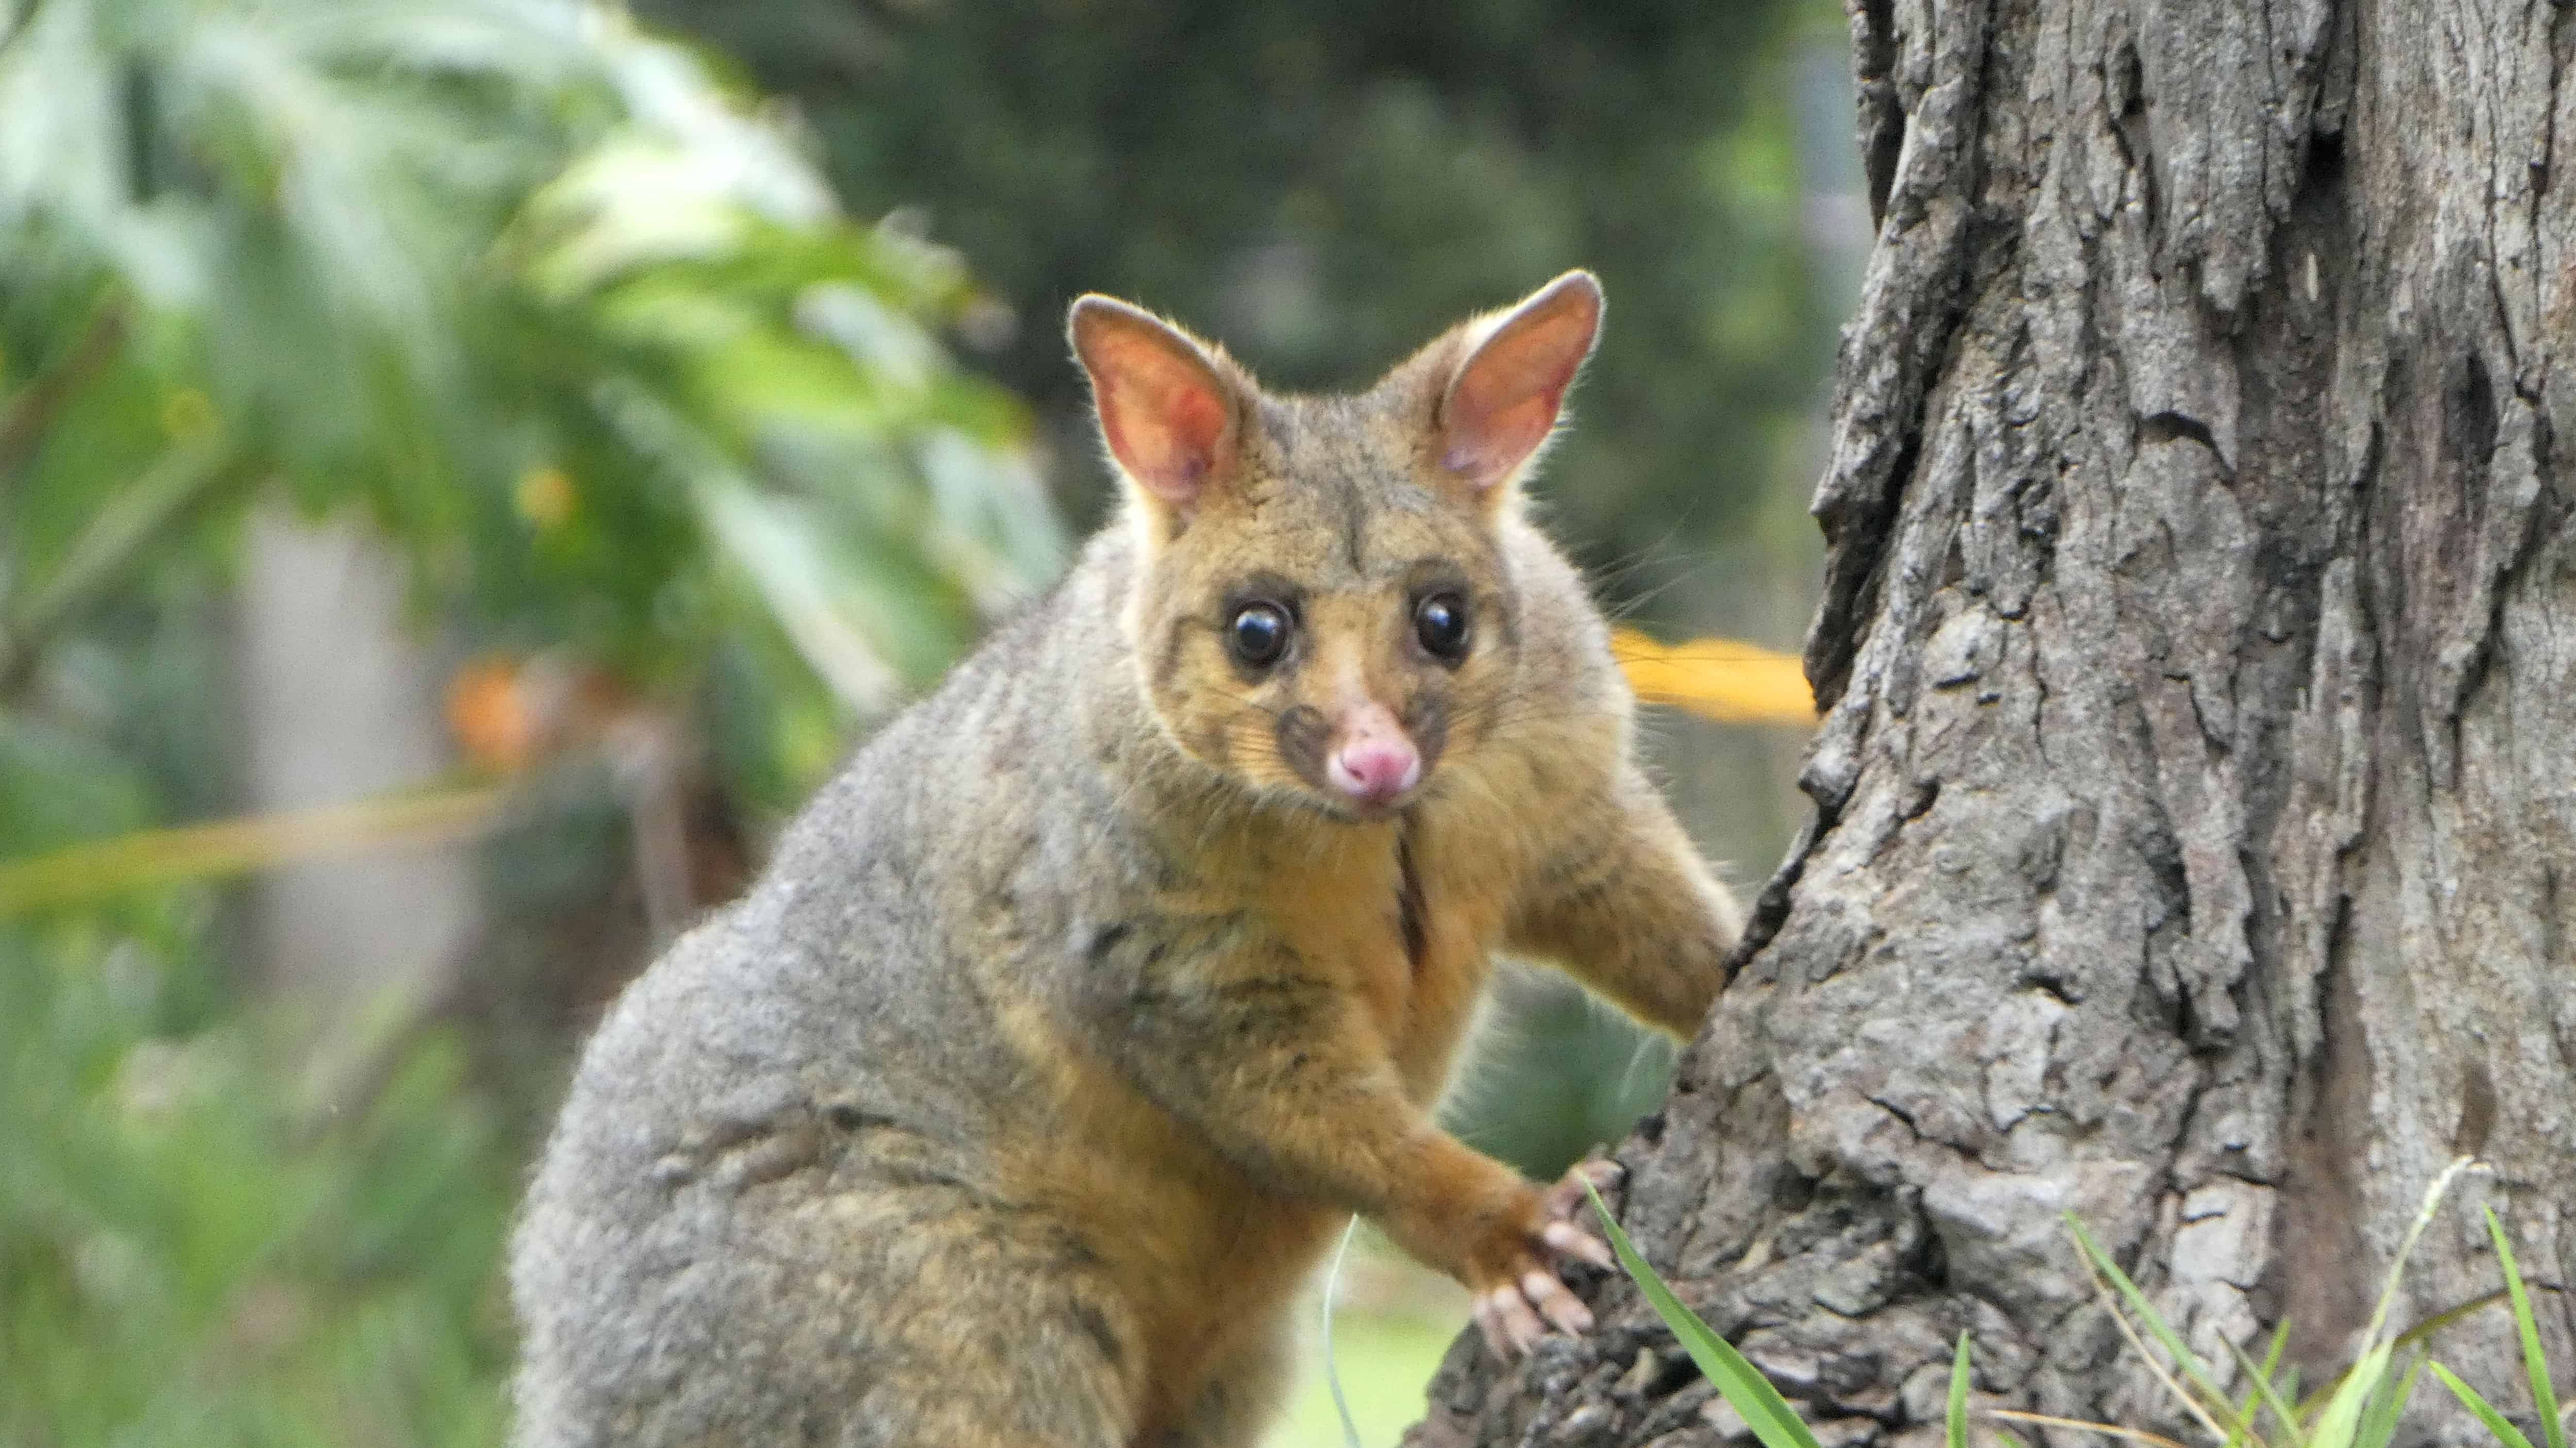 A possum standing up looking and peeping behind a branch of a tree.